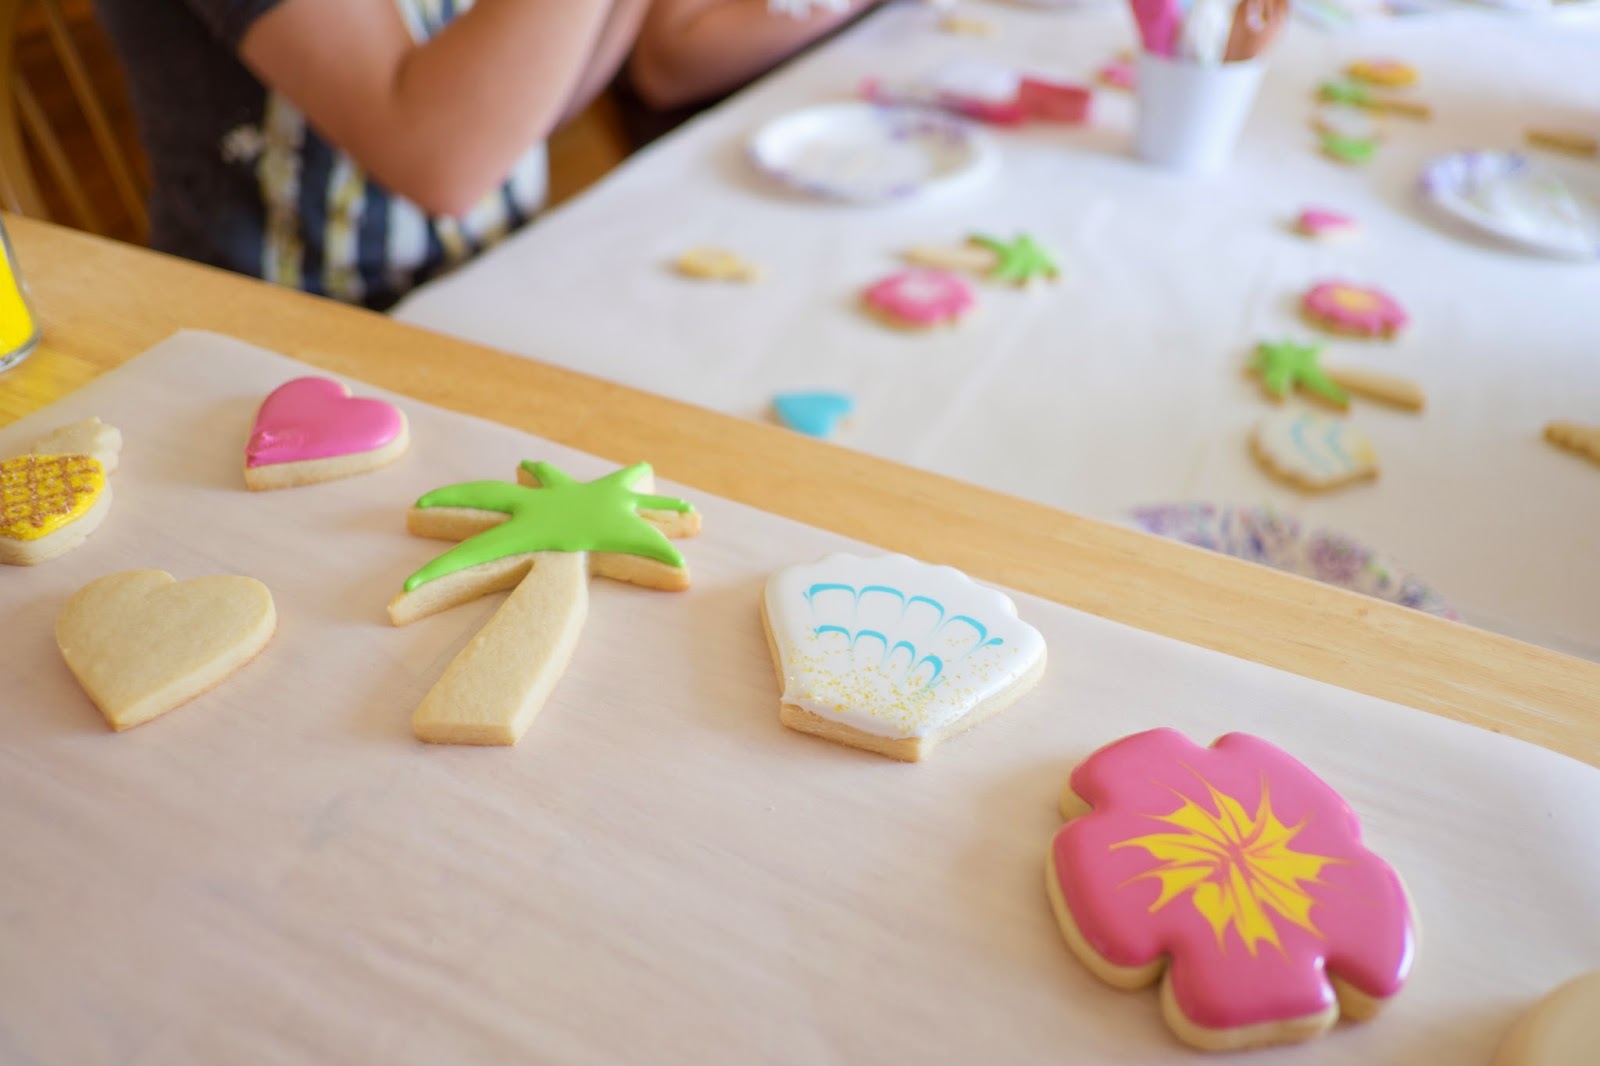 Decorating Sugar Cookies From Start to Finish- Part 2 - Glorious Treats